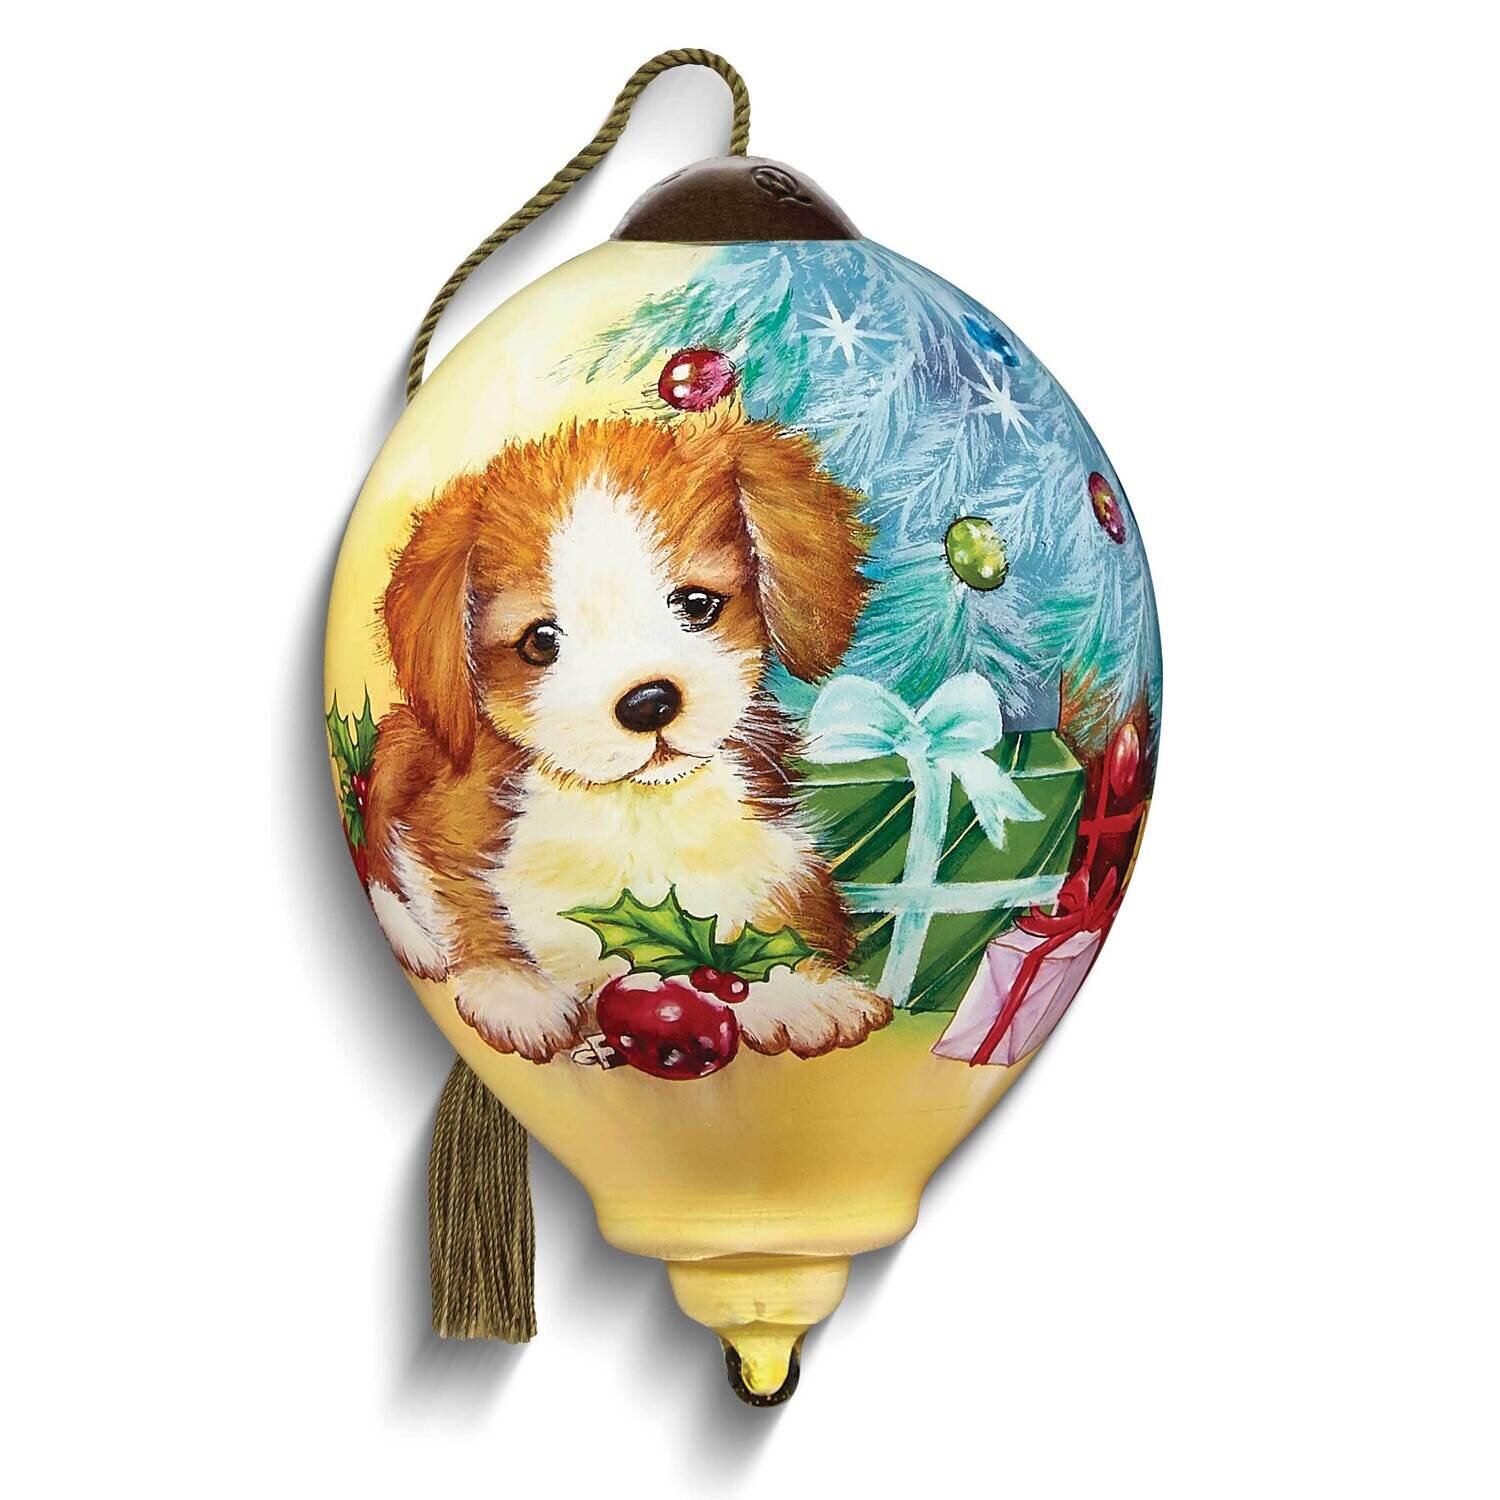 Neqwa Art Puppy With Tree And Presents Ornament GM25377